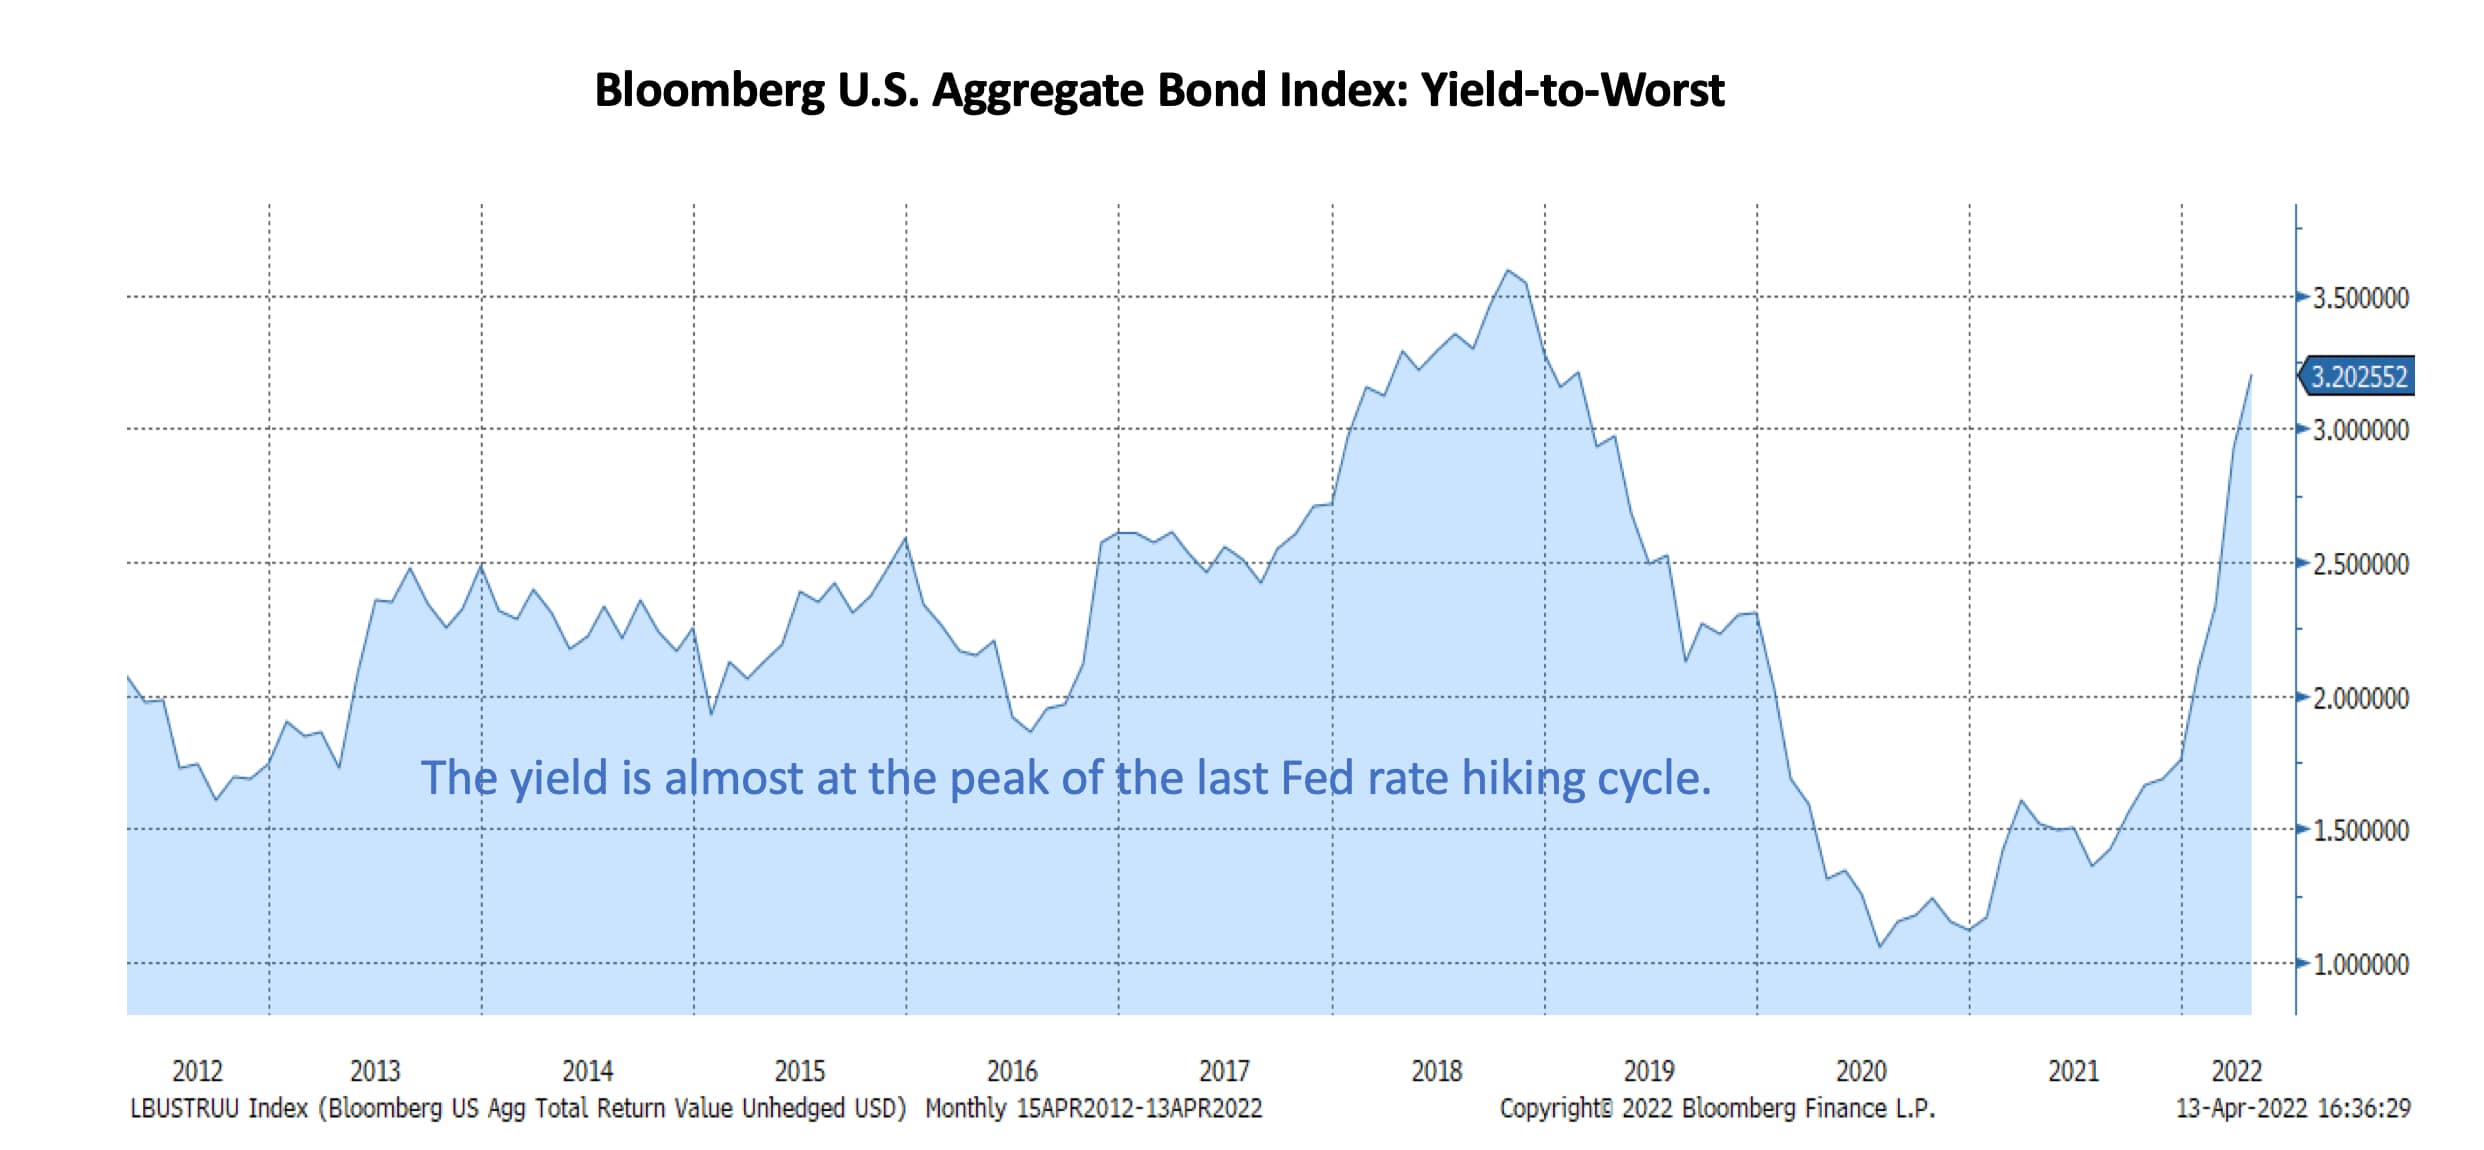 Bloomberg U.S. Aggregate Bond Index: Yield-to-Worst